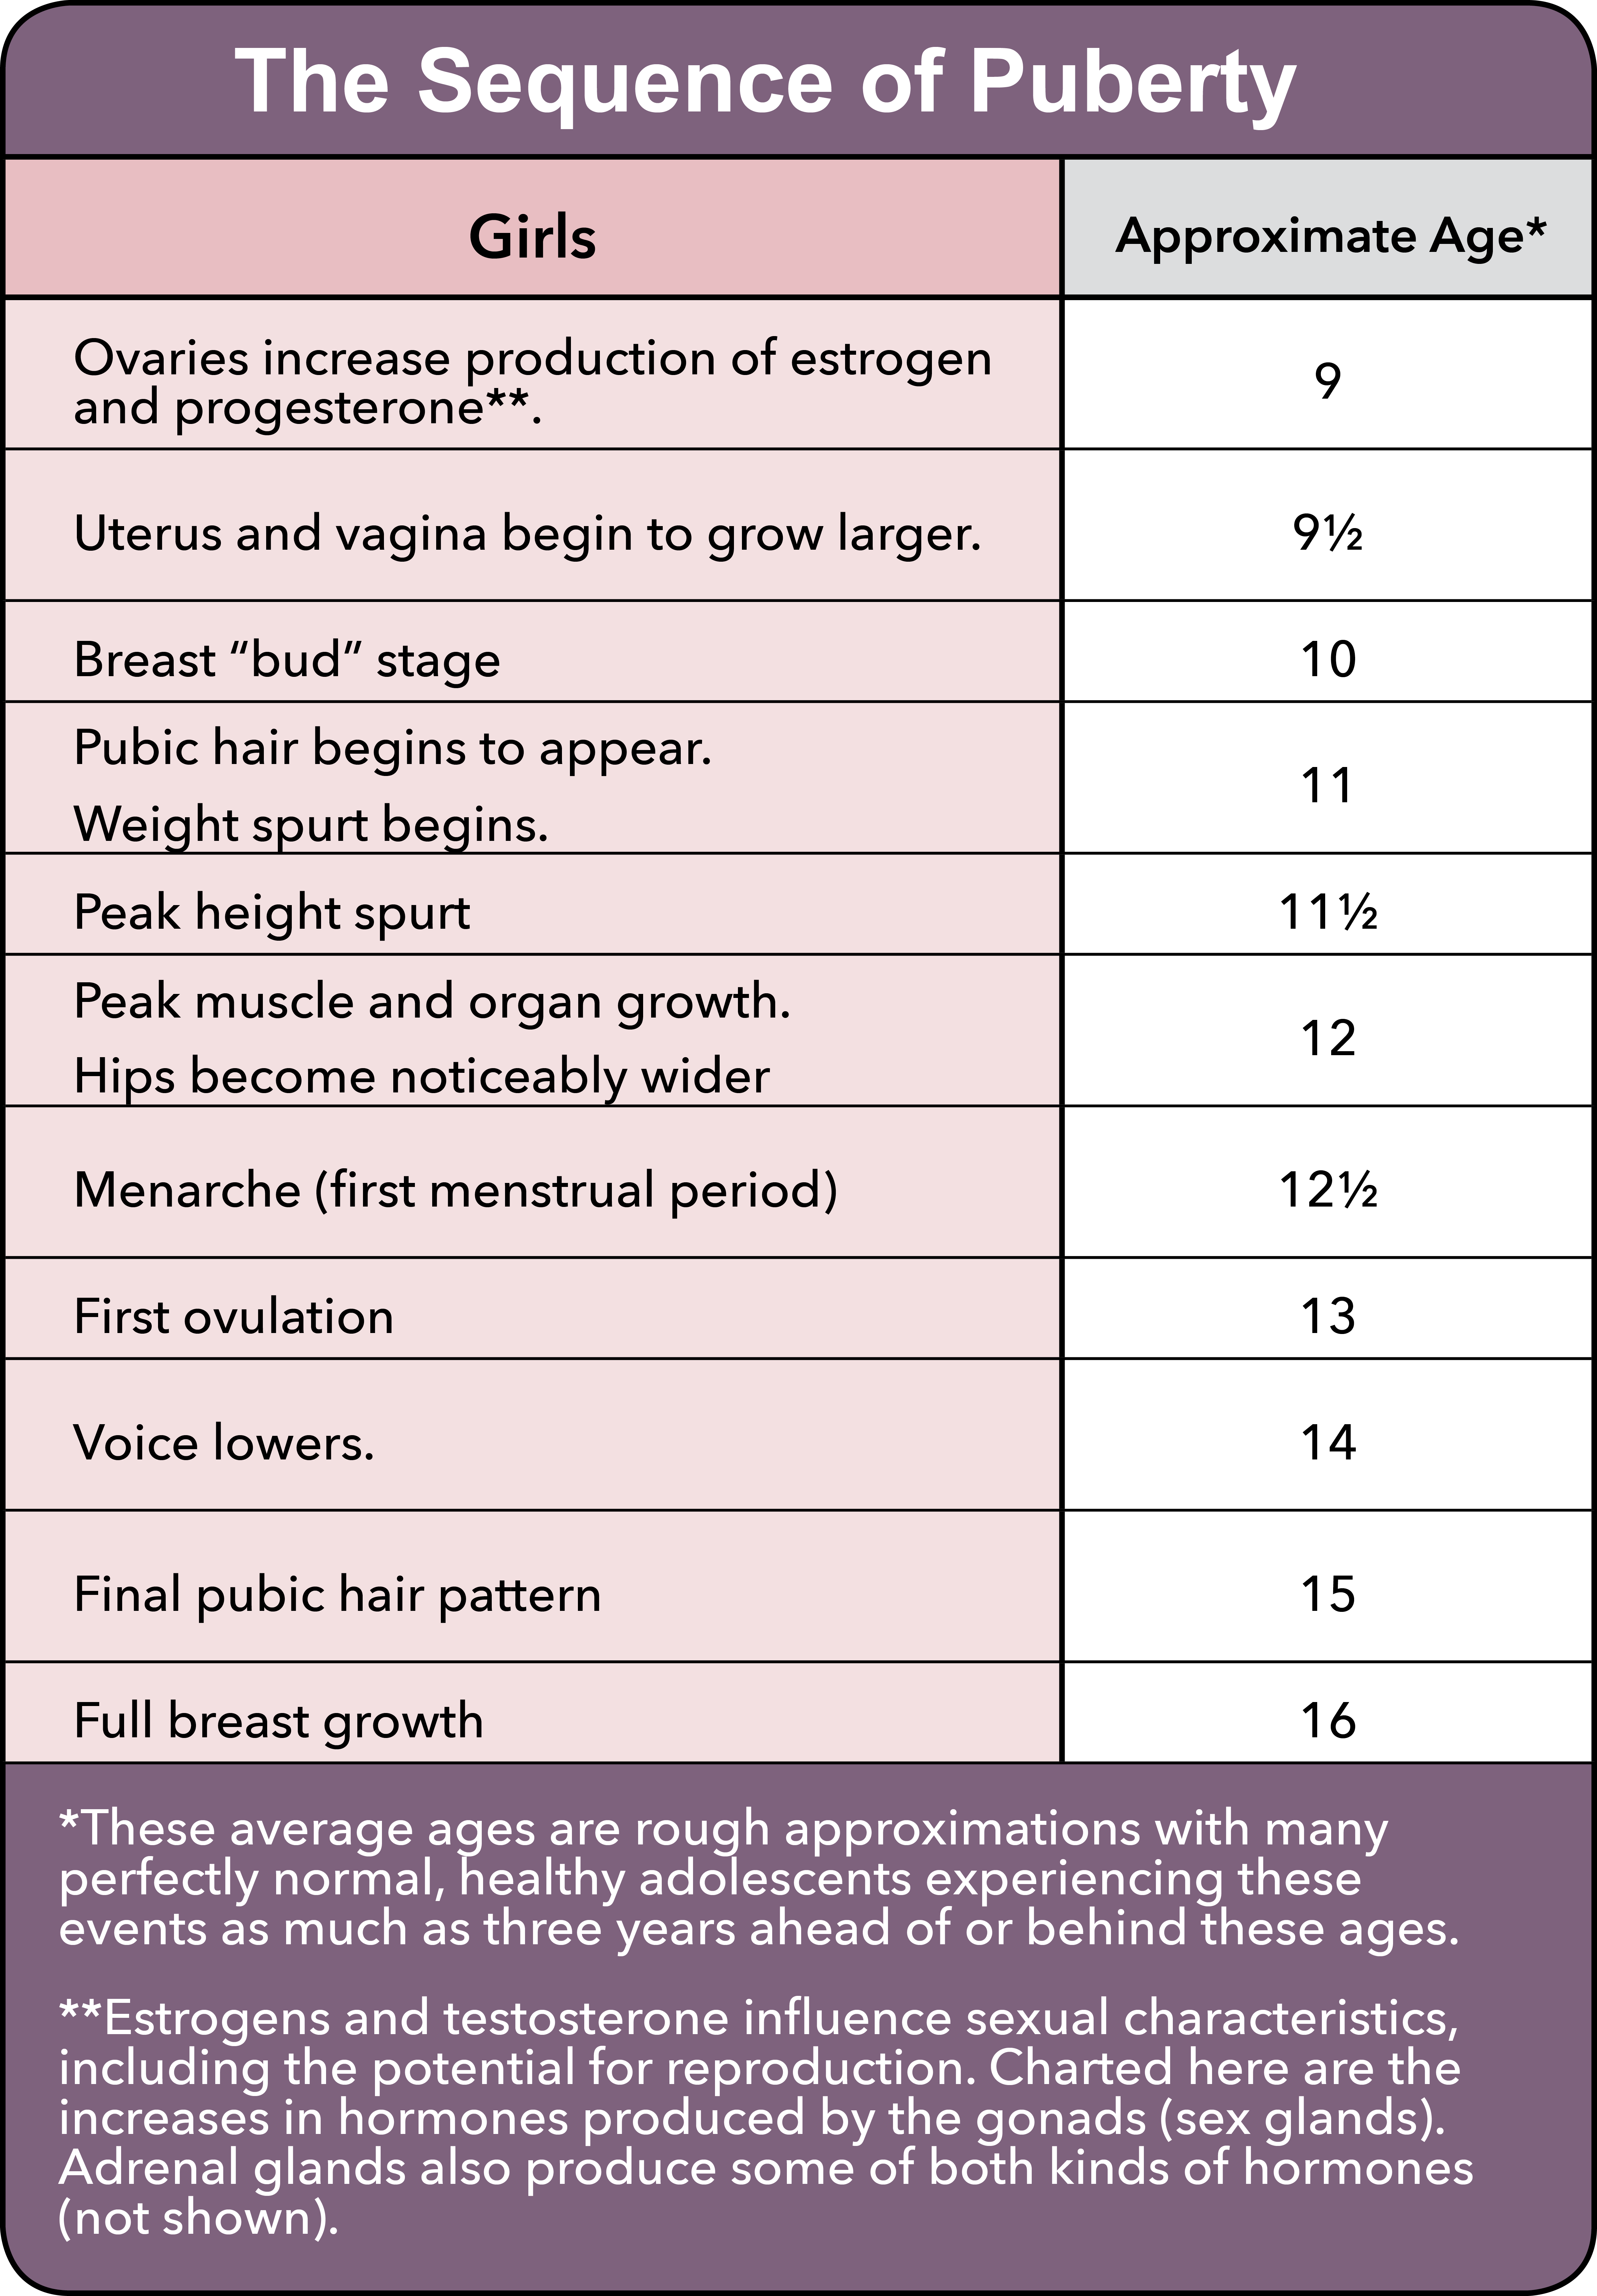 This table lays out the significant developments of puberty for girls and their approximate age of onset.  At approximately age 9, the ovaries increase production of estrogen and progesterone.  At approximately age 9 1/2, the uterus and vagina begin to grow larger.  At approximately age 10, breasts begin to develop.  At approximately age 11, pubic hair begins to appear, and a weight spurt begins. At approximately age 11 1/2, the height spurt reaches its peak.  At approximately age 12, females generally reach the peak of their organ growth and muscle development, and  their hips become noticeably wider.  At approximately age 12 ½, girls experience menarche, which is their first menstrual period.  At approximately age 13, girls have their first ovulation.  At approximately age 14, their voice lowers.  At approximately age 15, they develop their final pubic hair pattern.  At approximately age 16, they have full breast growth.  Please note that these average ages are rough approximations, with many perfectly healthy adolescents as much as three years ahead of or behind these ages.  Also, estrogen and testosterone influence sexual characteristics, including the potential for reproduction. Charted in this table are the increases in hormones produced by the gonads (sex glands). Adrenal glands produce some of both kinds of hormones (not shown).